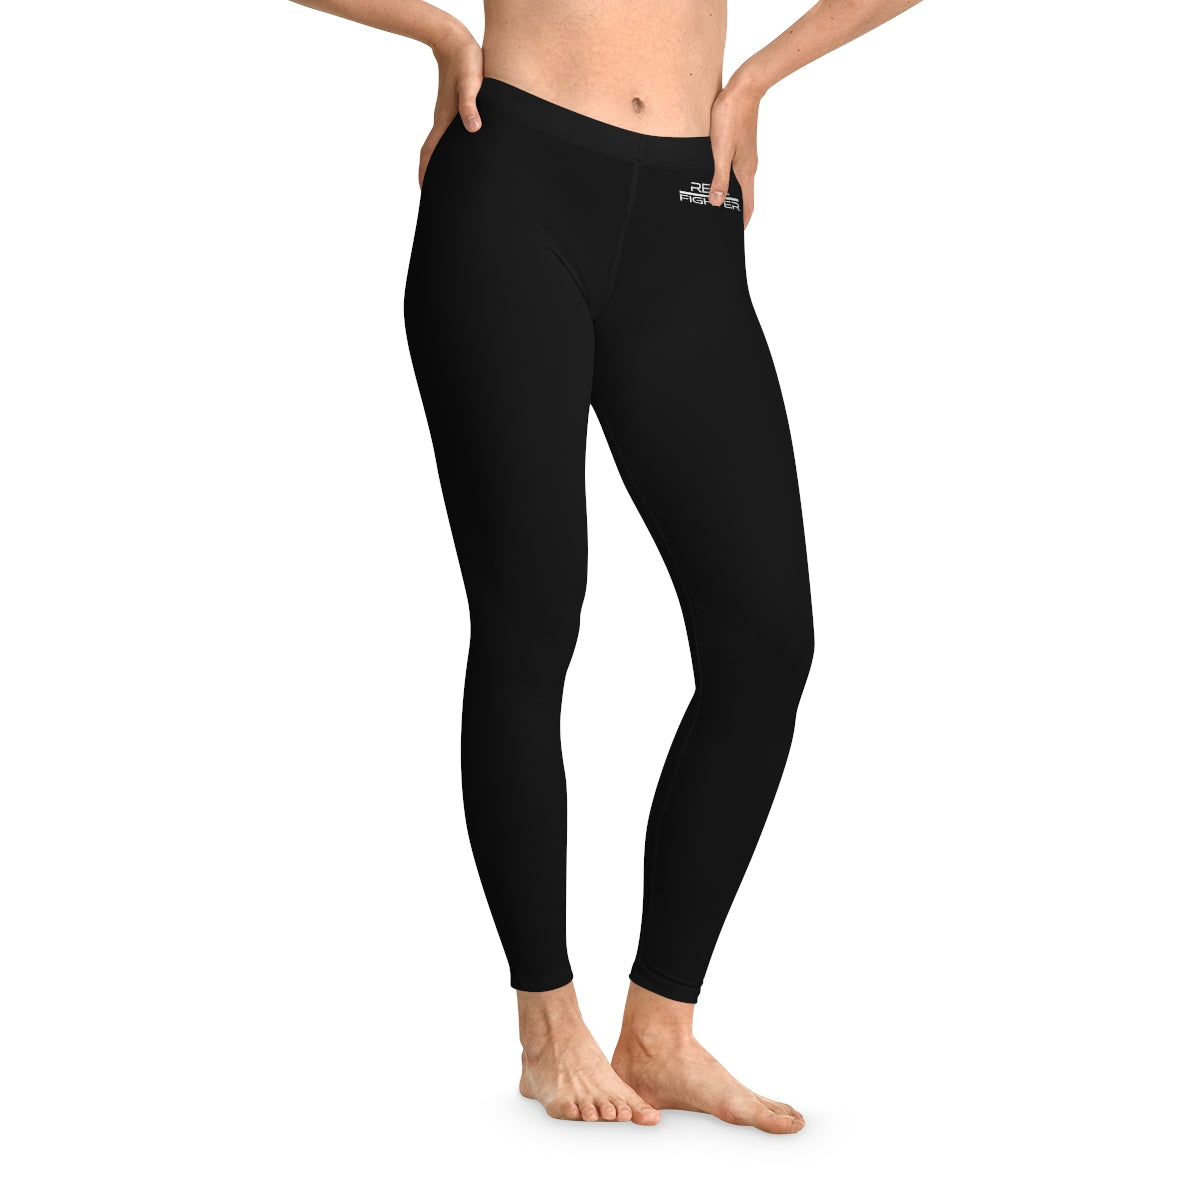 Real Fighter Brand™ Stretchy Leggings